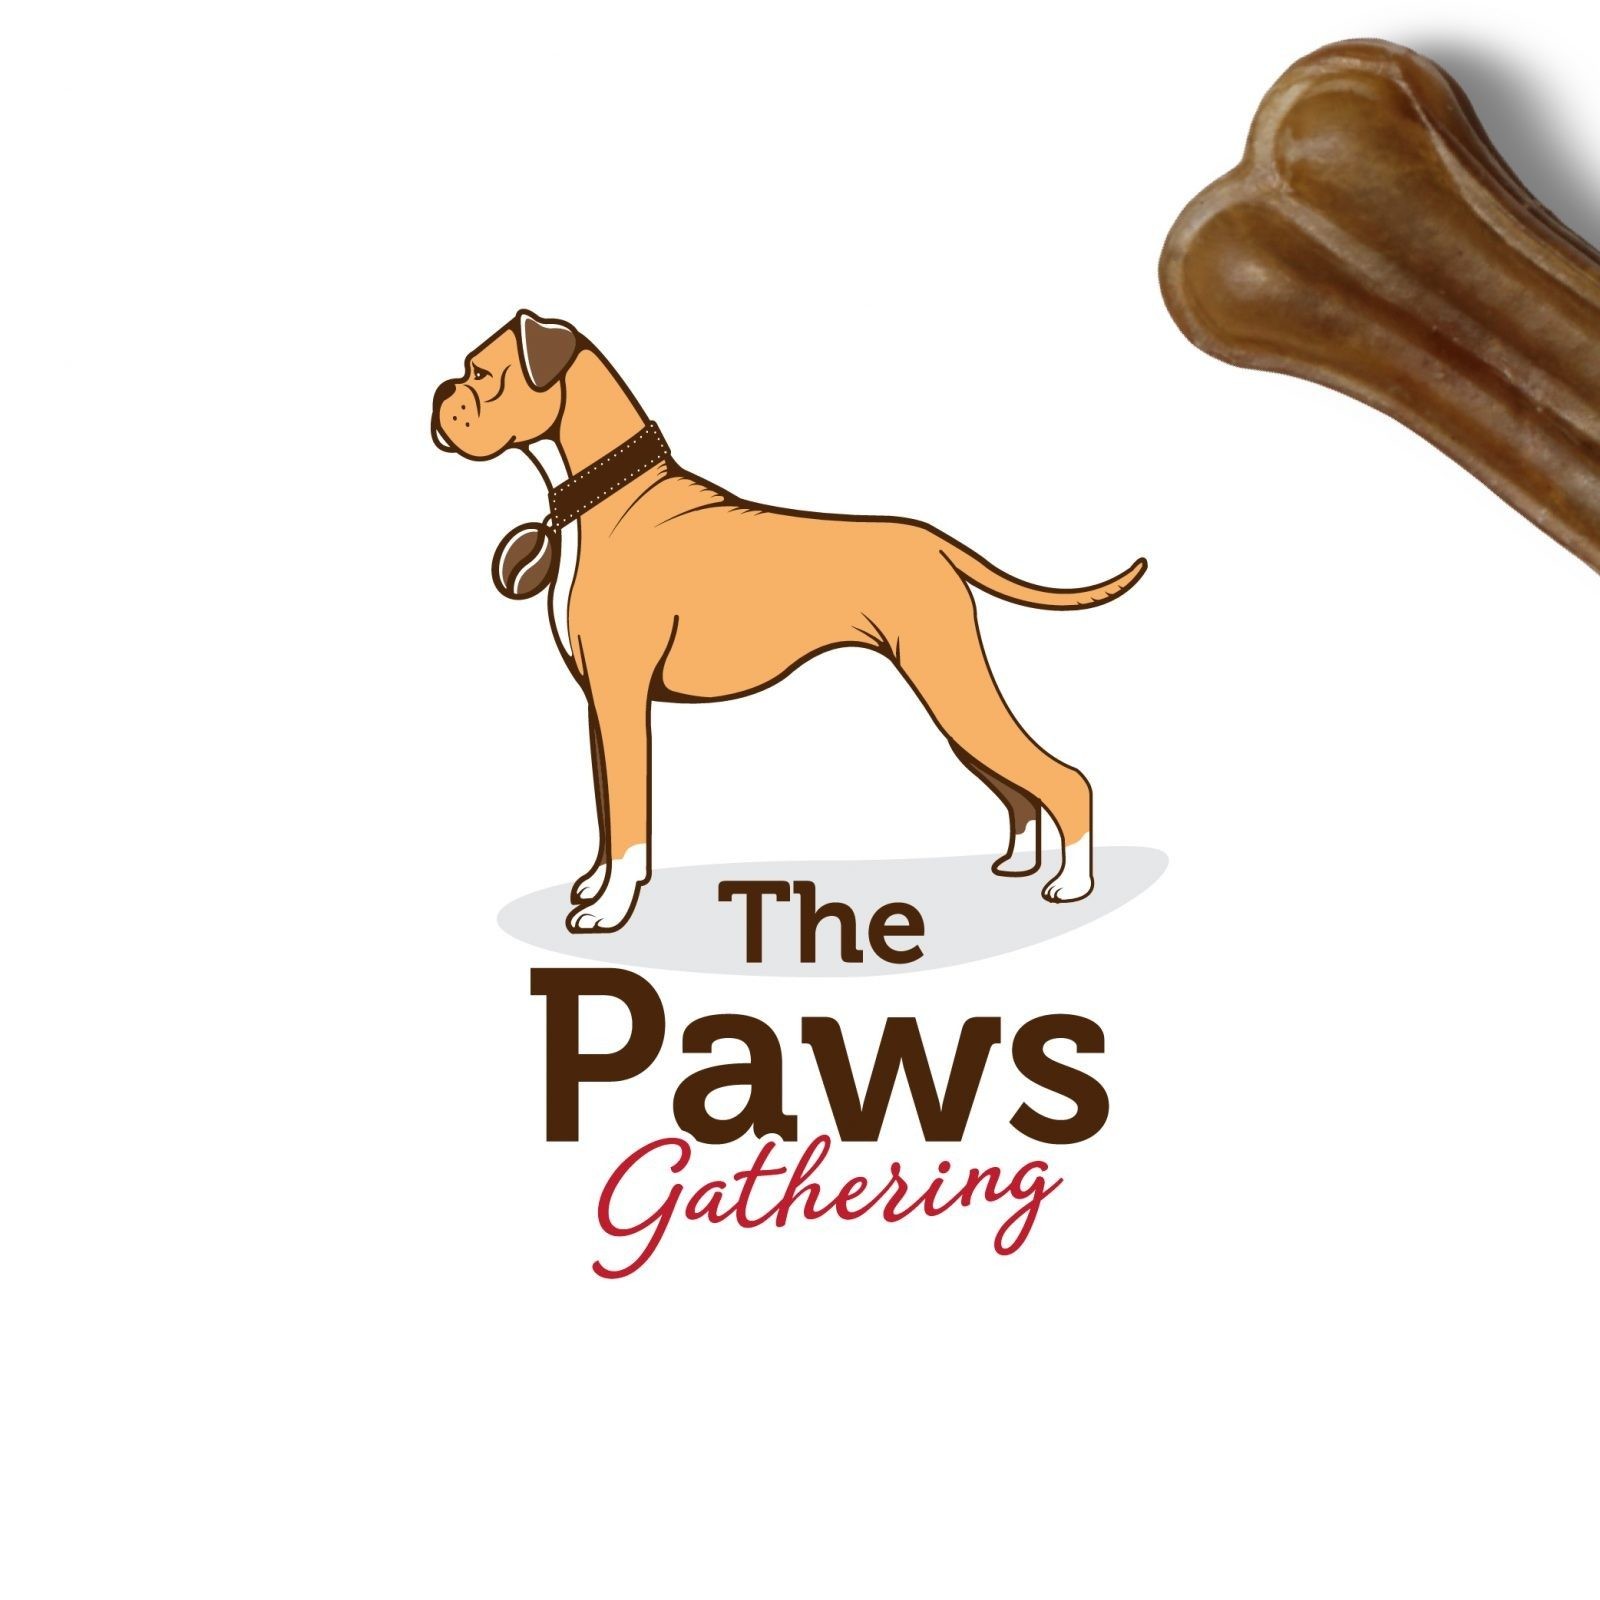 Cartoony Mascot Dog for Pets Grooming and Coffe Shop Company